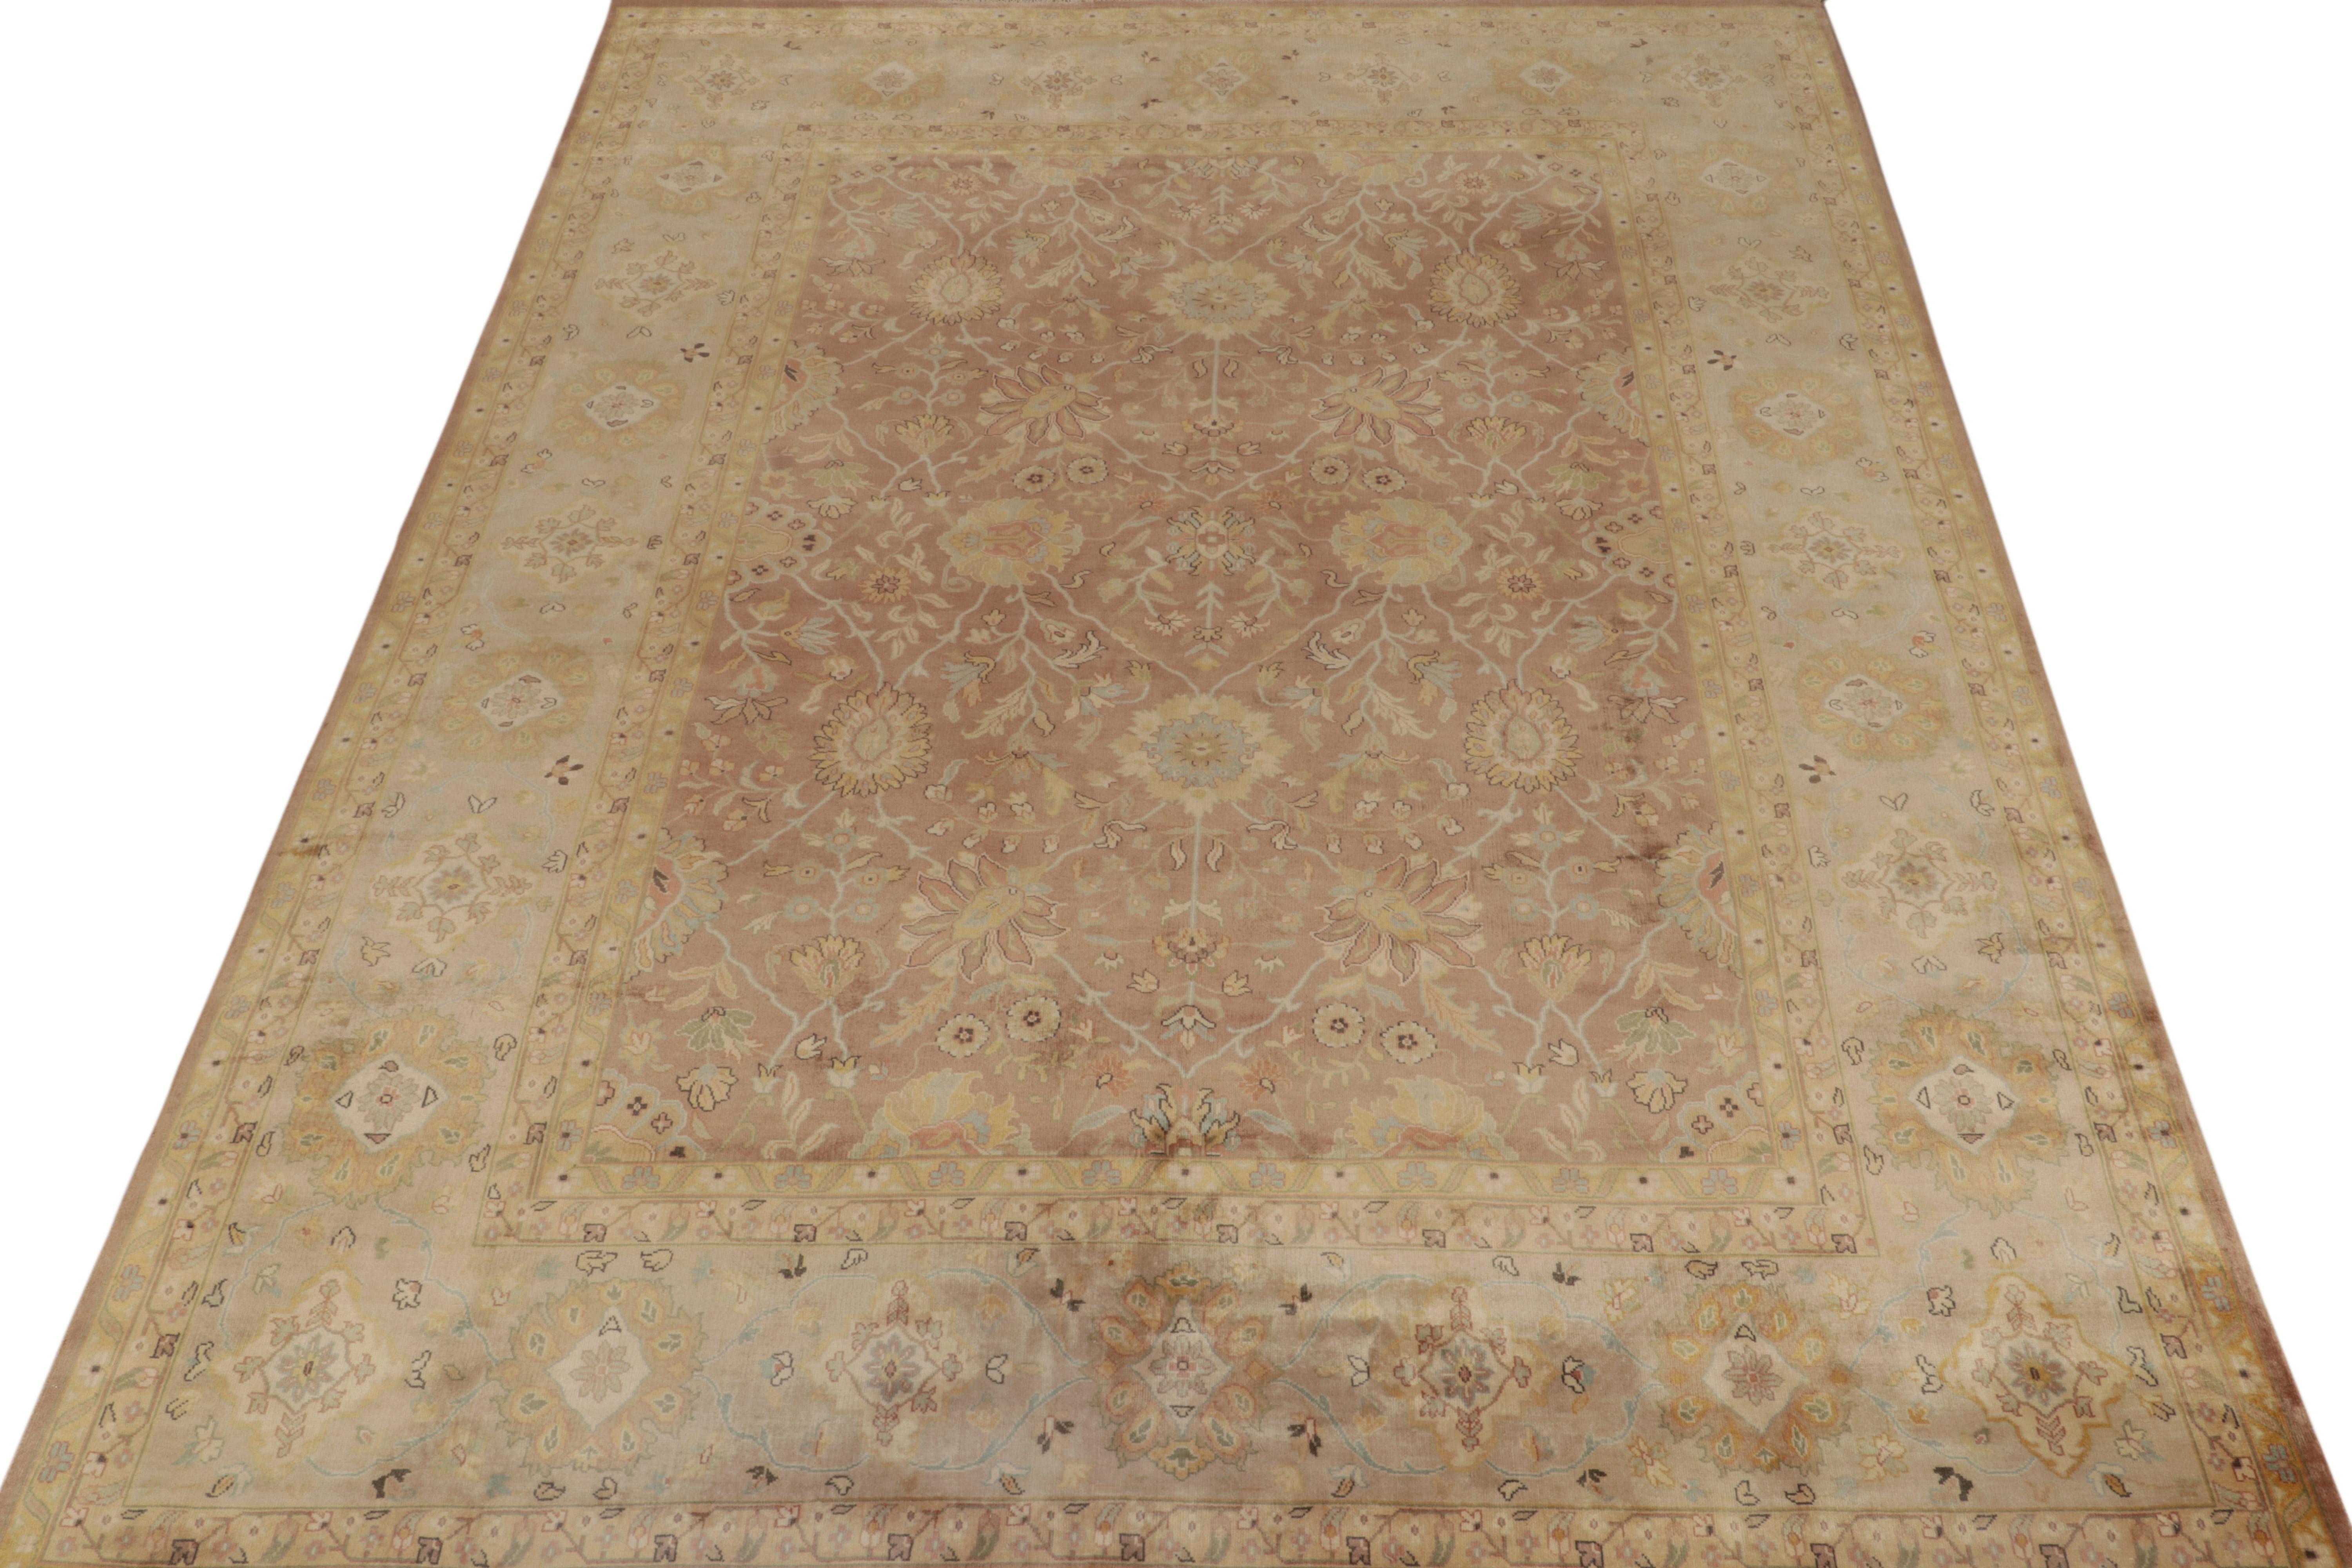 Indian Rug & Kilim’s Tabriz Style Rug in Brown with Gold & Blue Floral Patterns For Sale